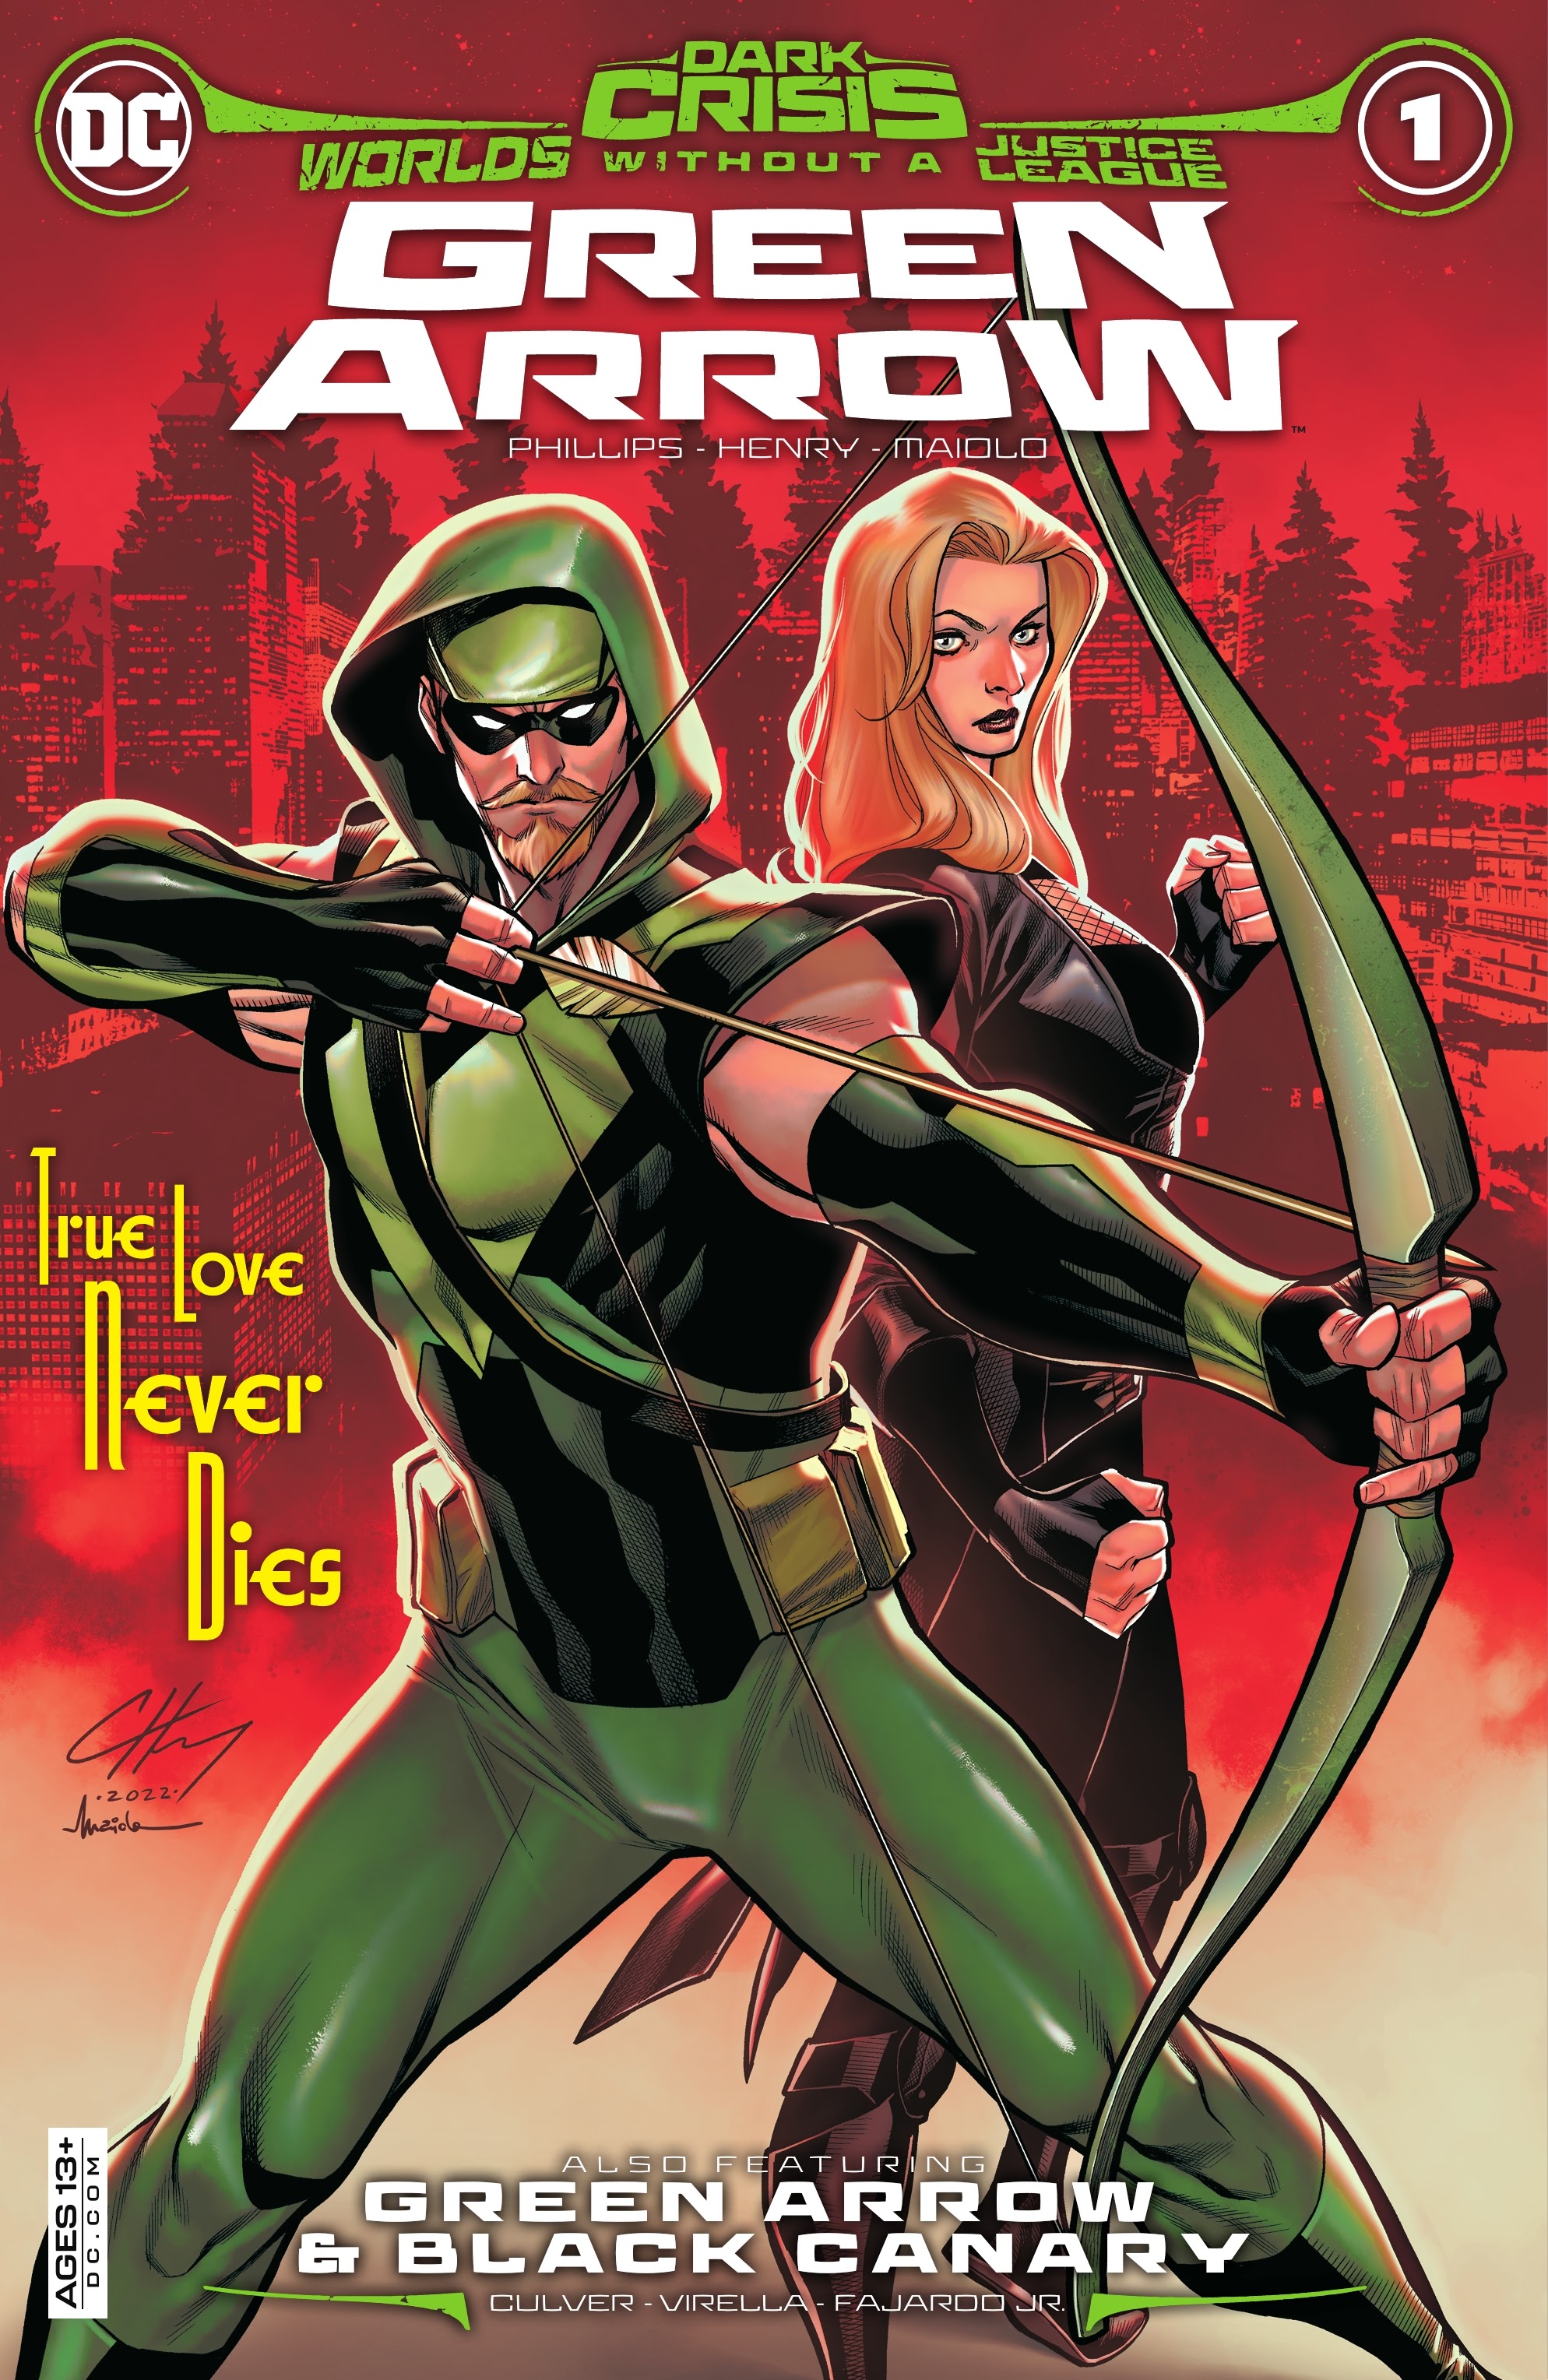 Read online Dark Crisis: Worlds Without A Justice League - Green Arrow comic -  Issue #1 - 1